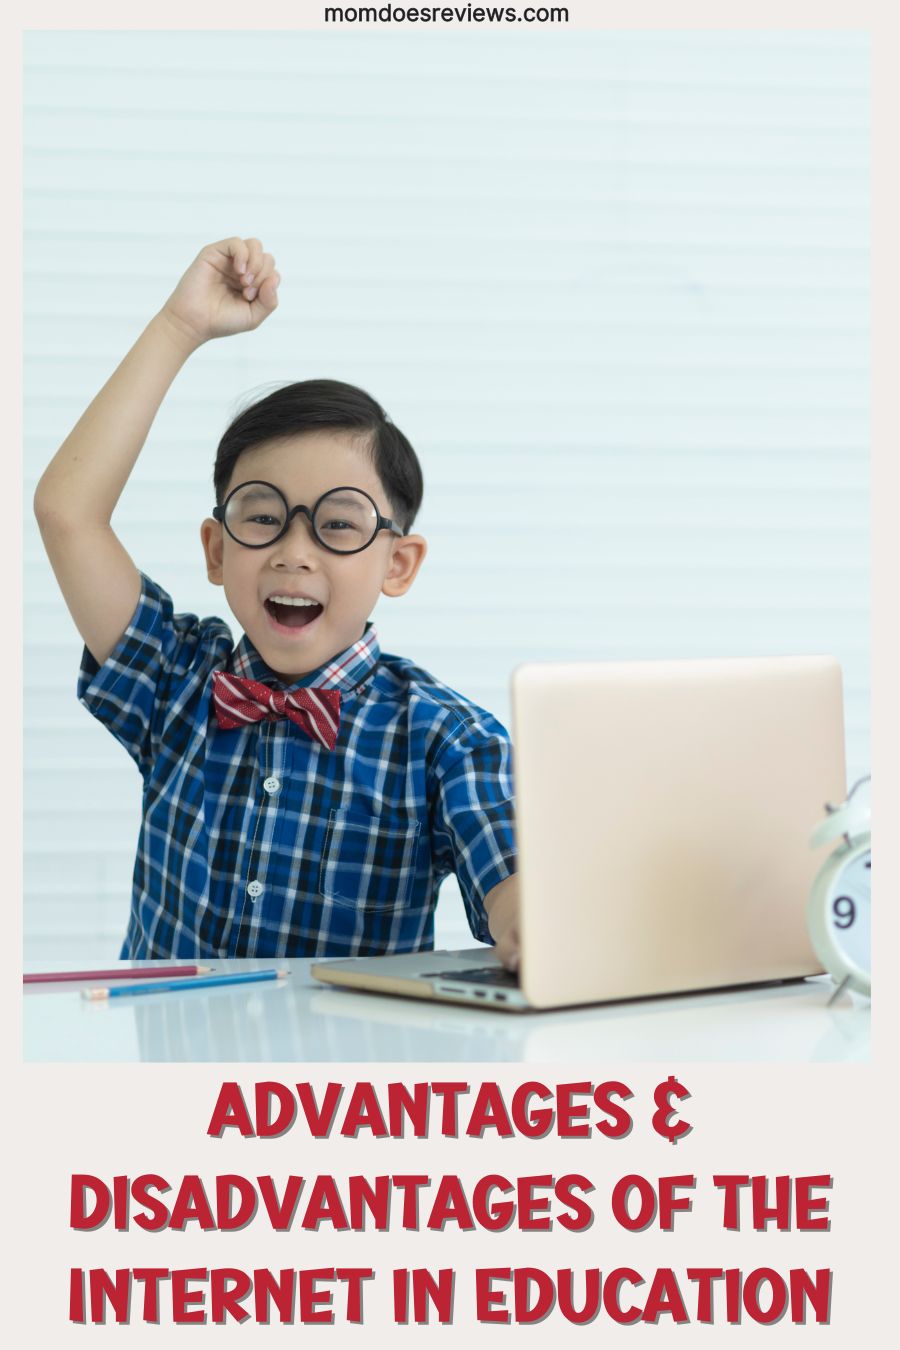 Advantages & Disadvantages of the Internet in Education